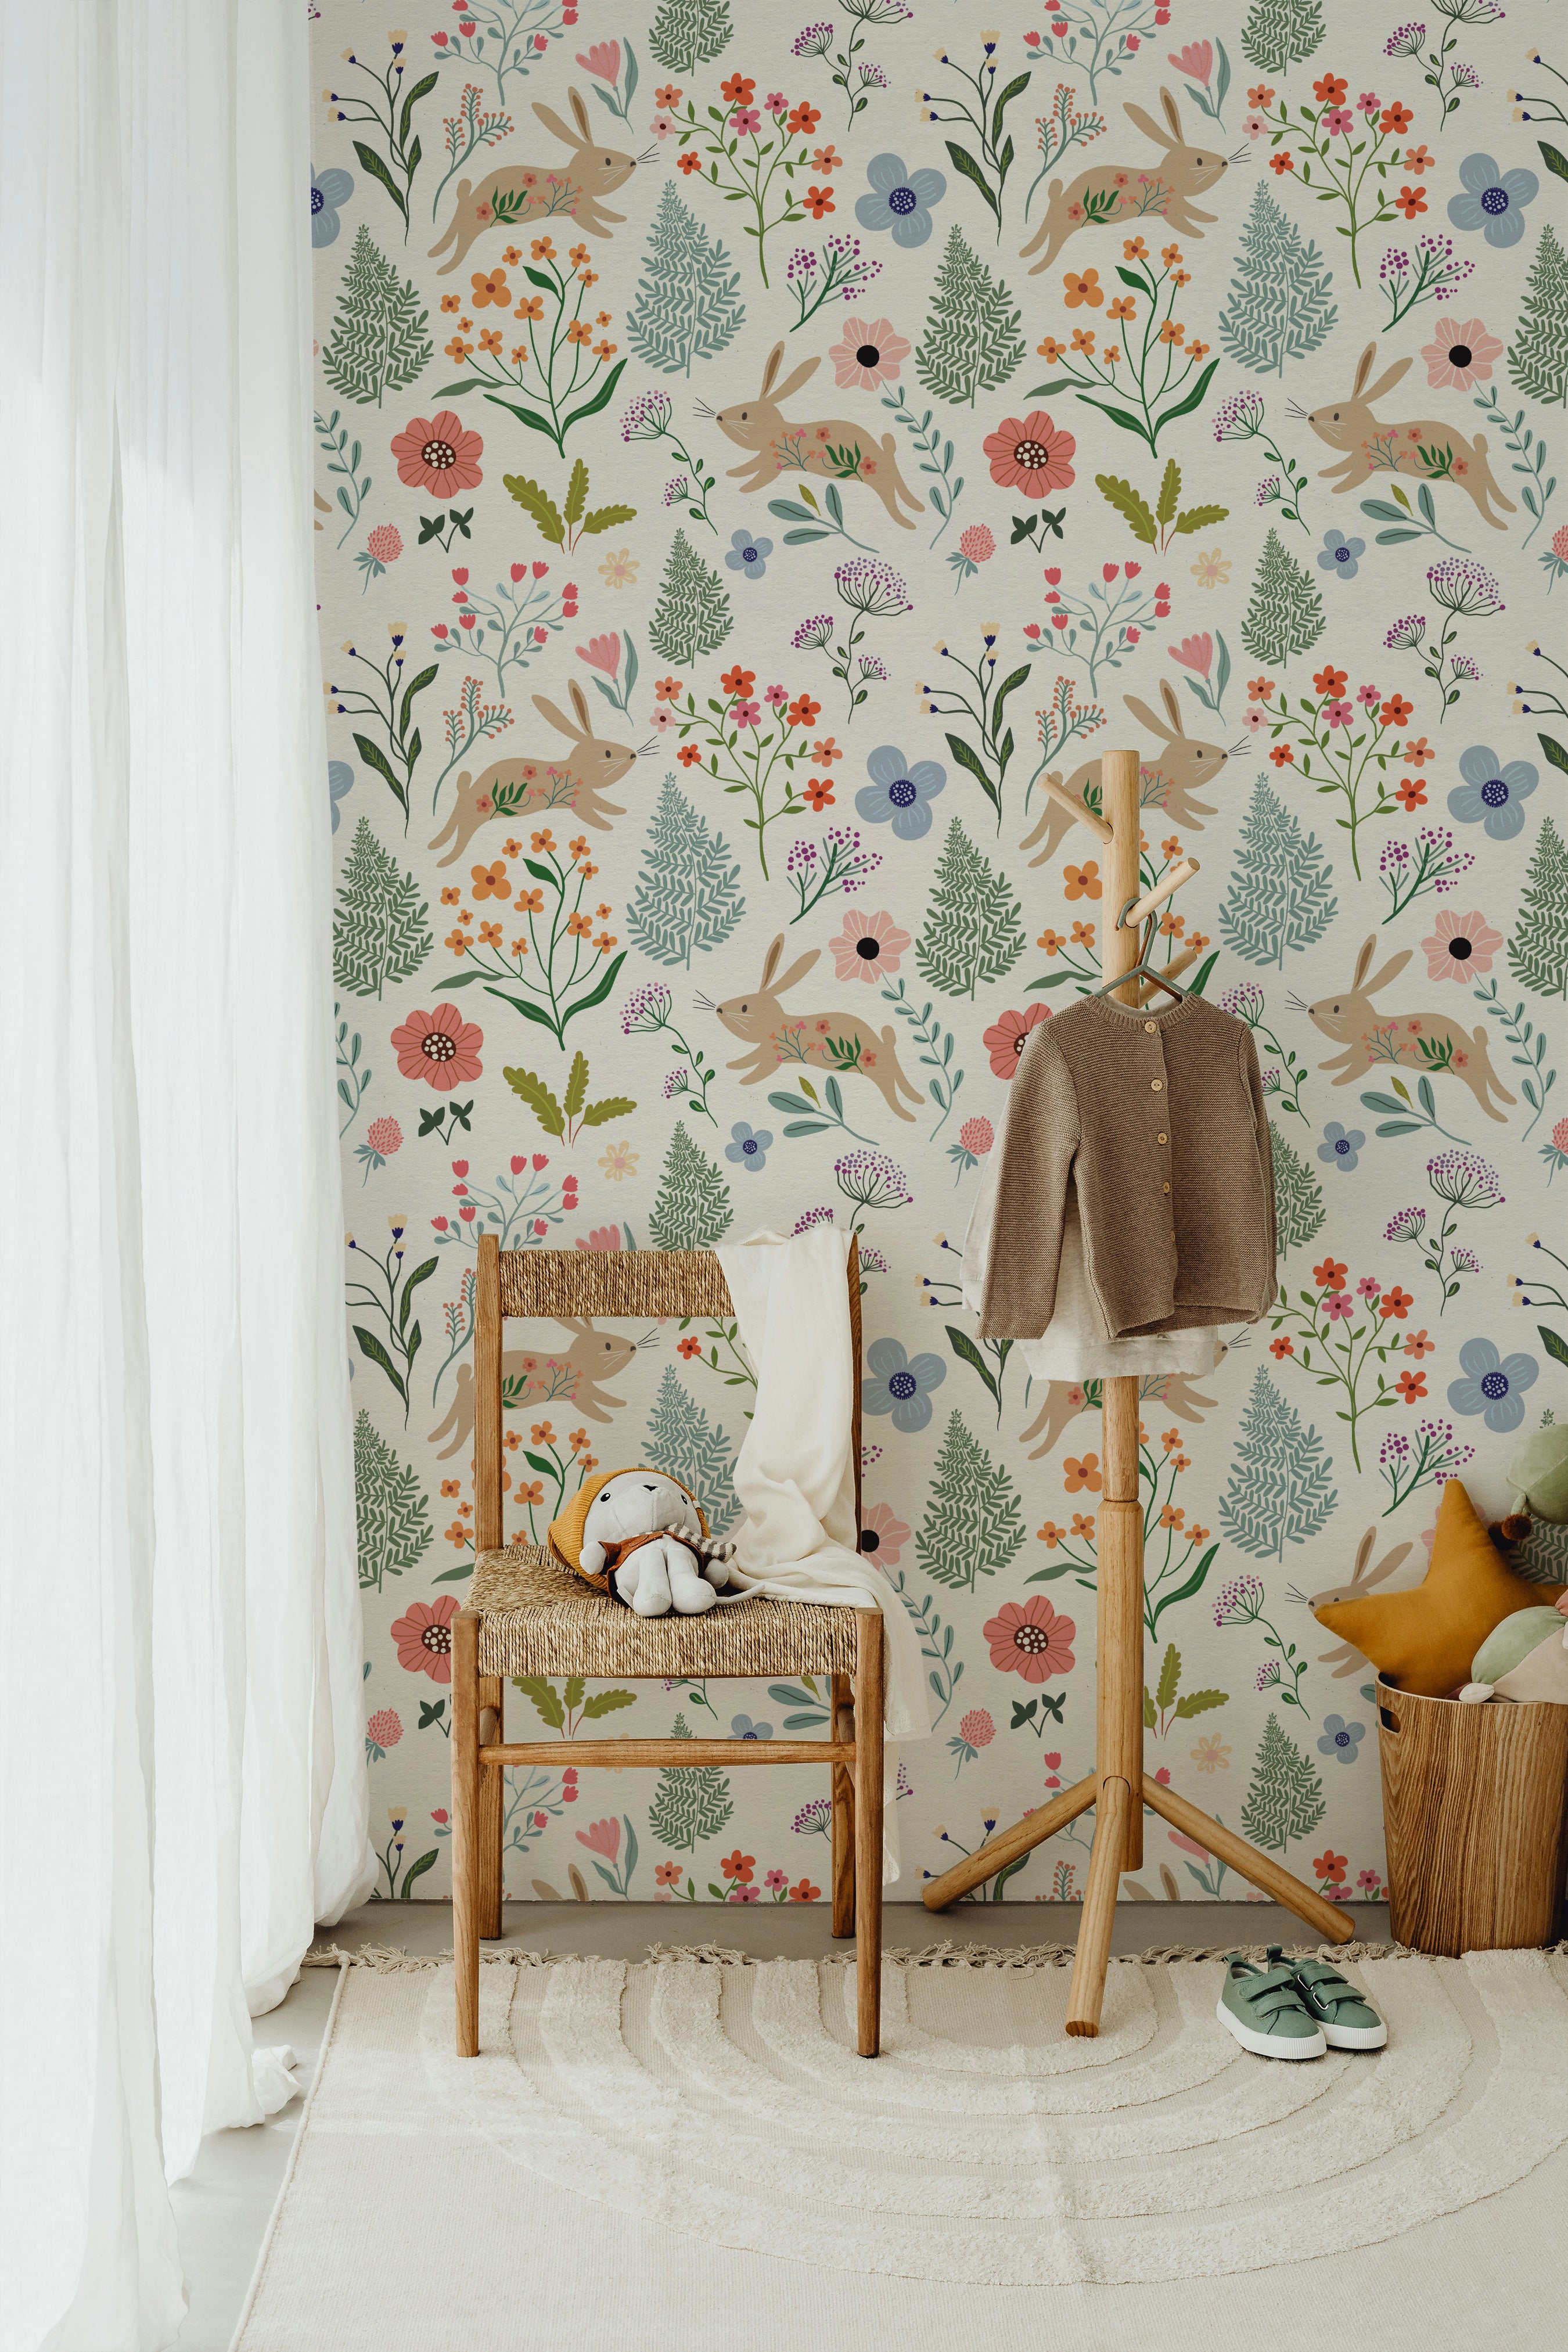 A whimsical children's room corner with Colourful Spring Bunnies Wallpaper featuring playful rabbits and a mix of floral and botanical prints. A wooden chair with a woven seat holds a stuffed rabbit, set against a backdrop of light beige wallpaper adorned with pastel-colored flowers and green foliage.